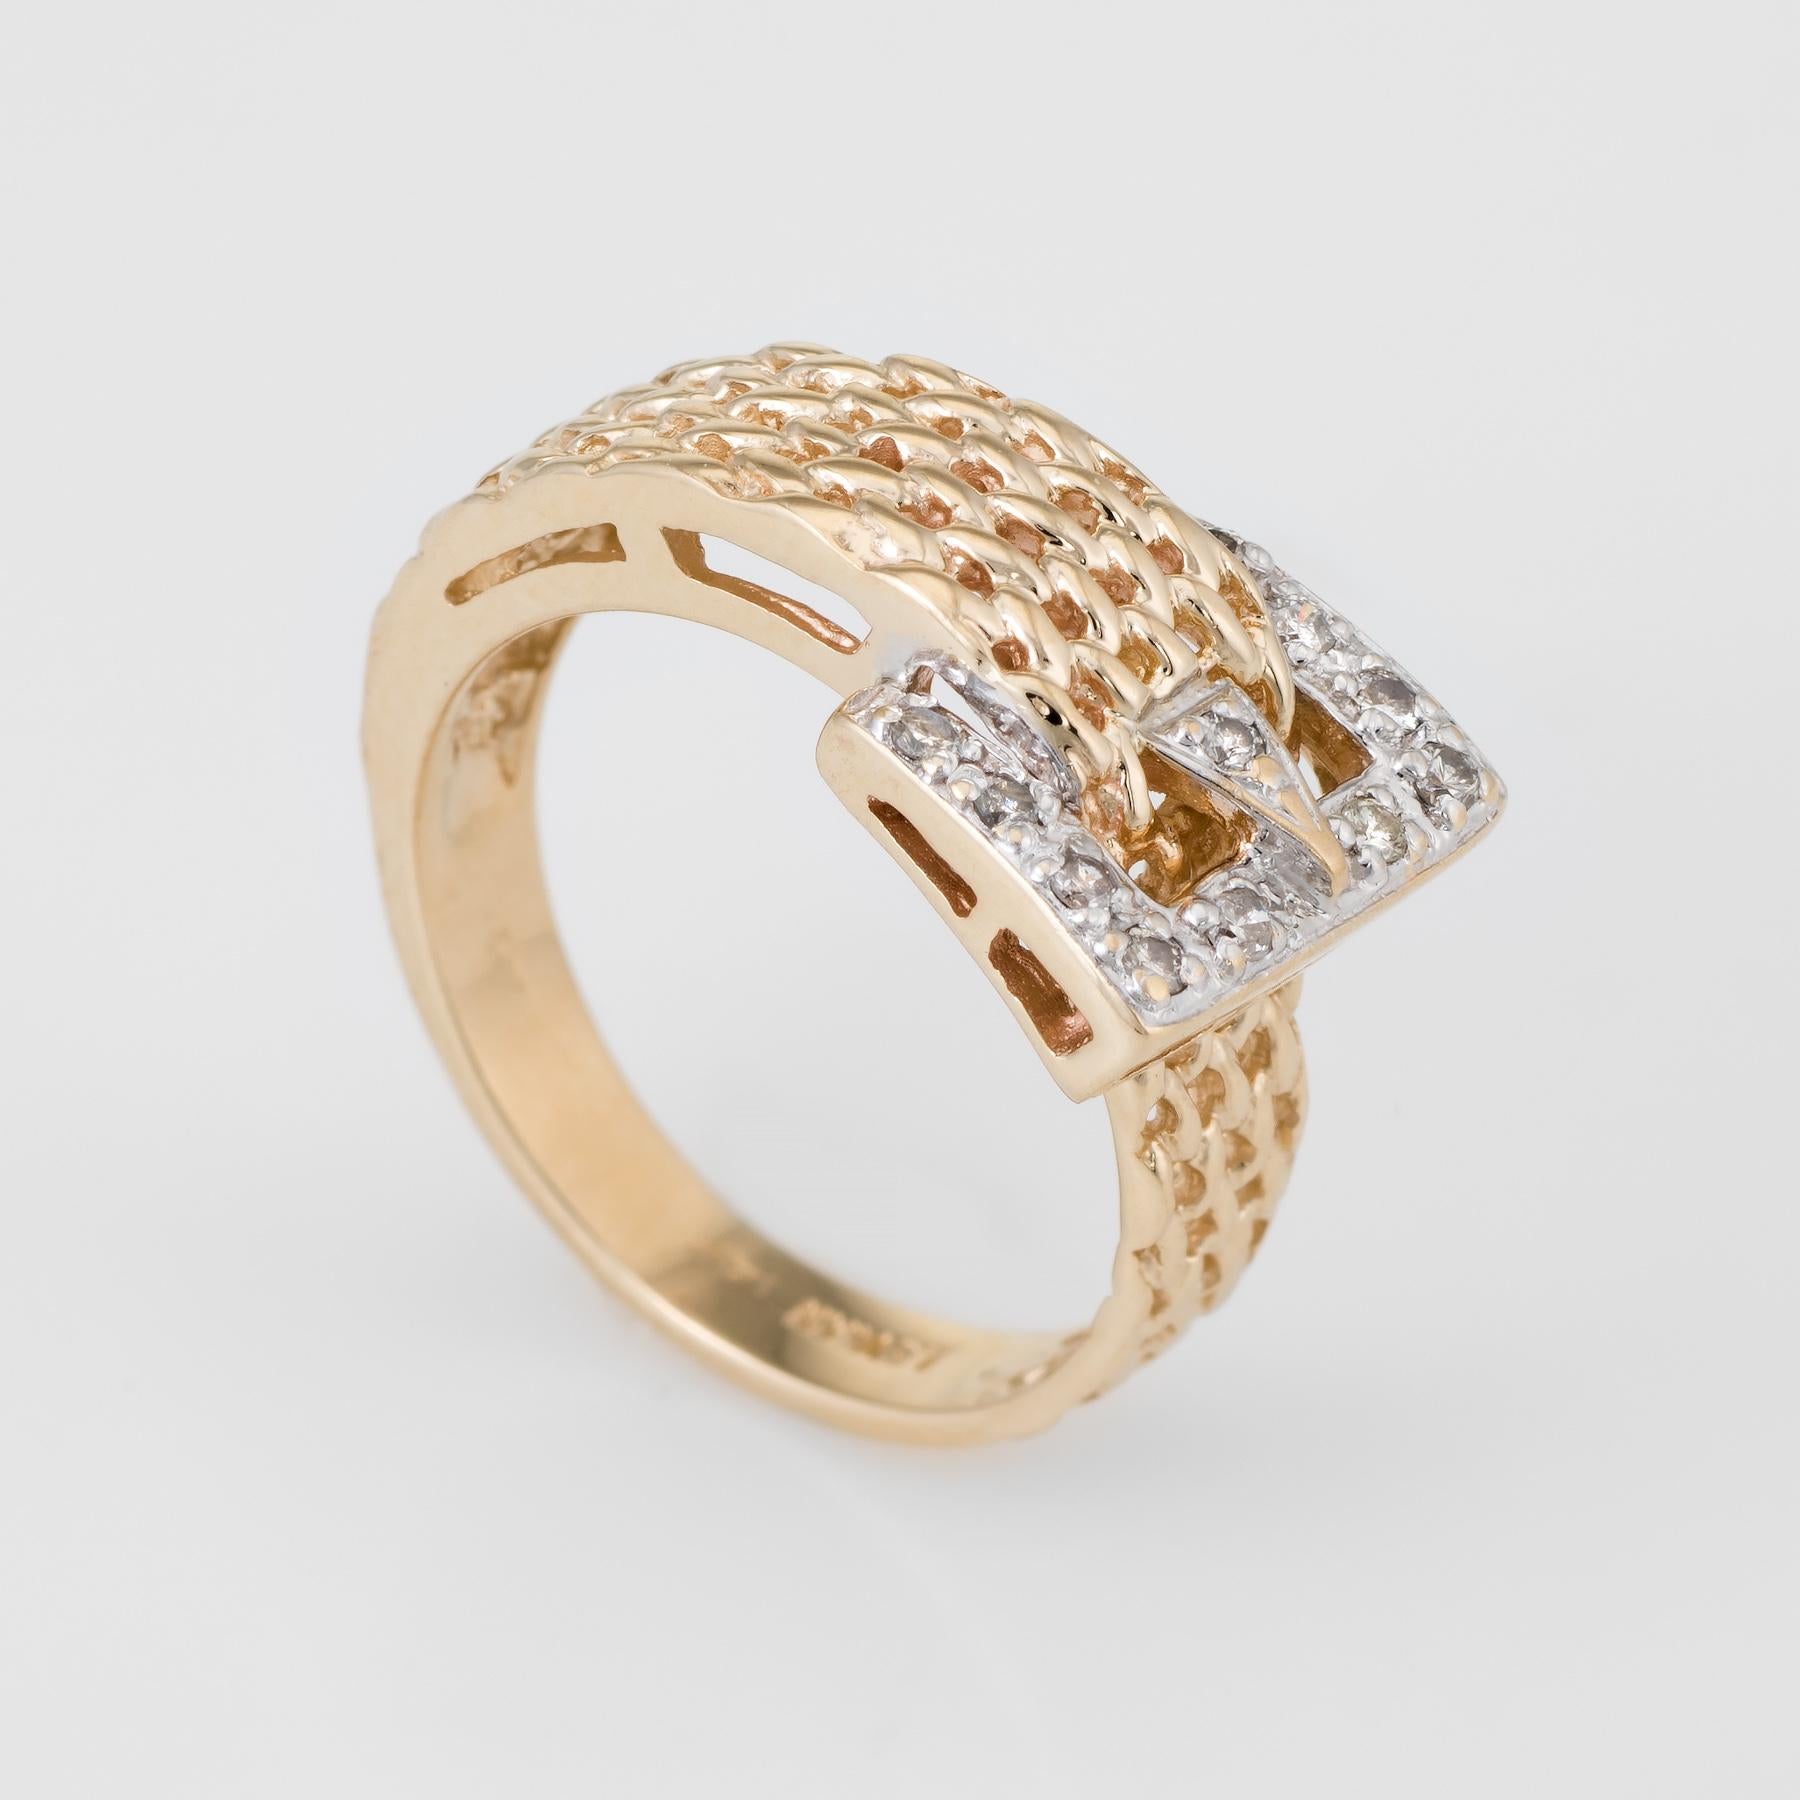 Finely detailed LeVian diamond buckle ring, crafted in 14 karat yellow gold. 

Diamonds total an estimated 0.11 carats (estimated at G-H color and VS2-SI1 clarity).   

The ring is in excellent condition. 

Particulars:

Weight: 4.9 grams

Stones: 